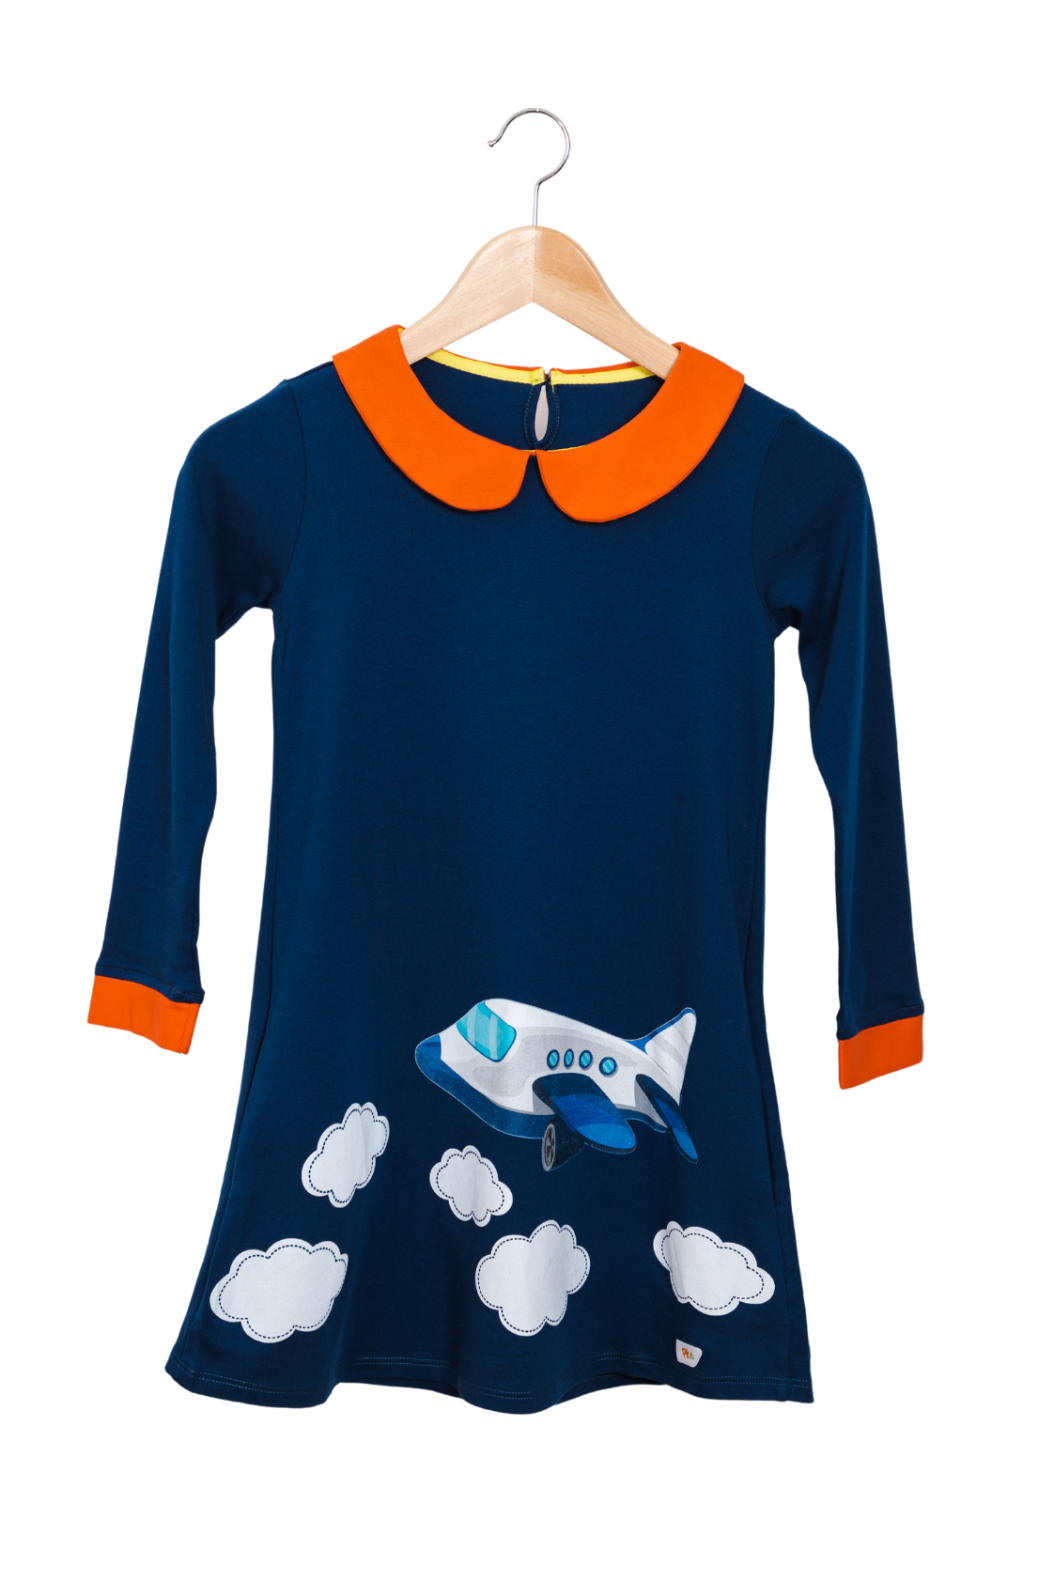 Airplane dress, STEM and non-Stereotypical designs- Prisma Kiddos - Children Fashion - dress with pockets